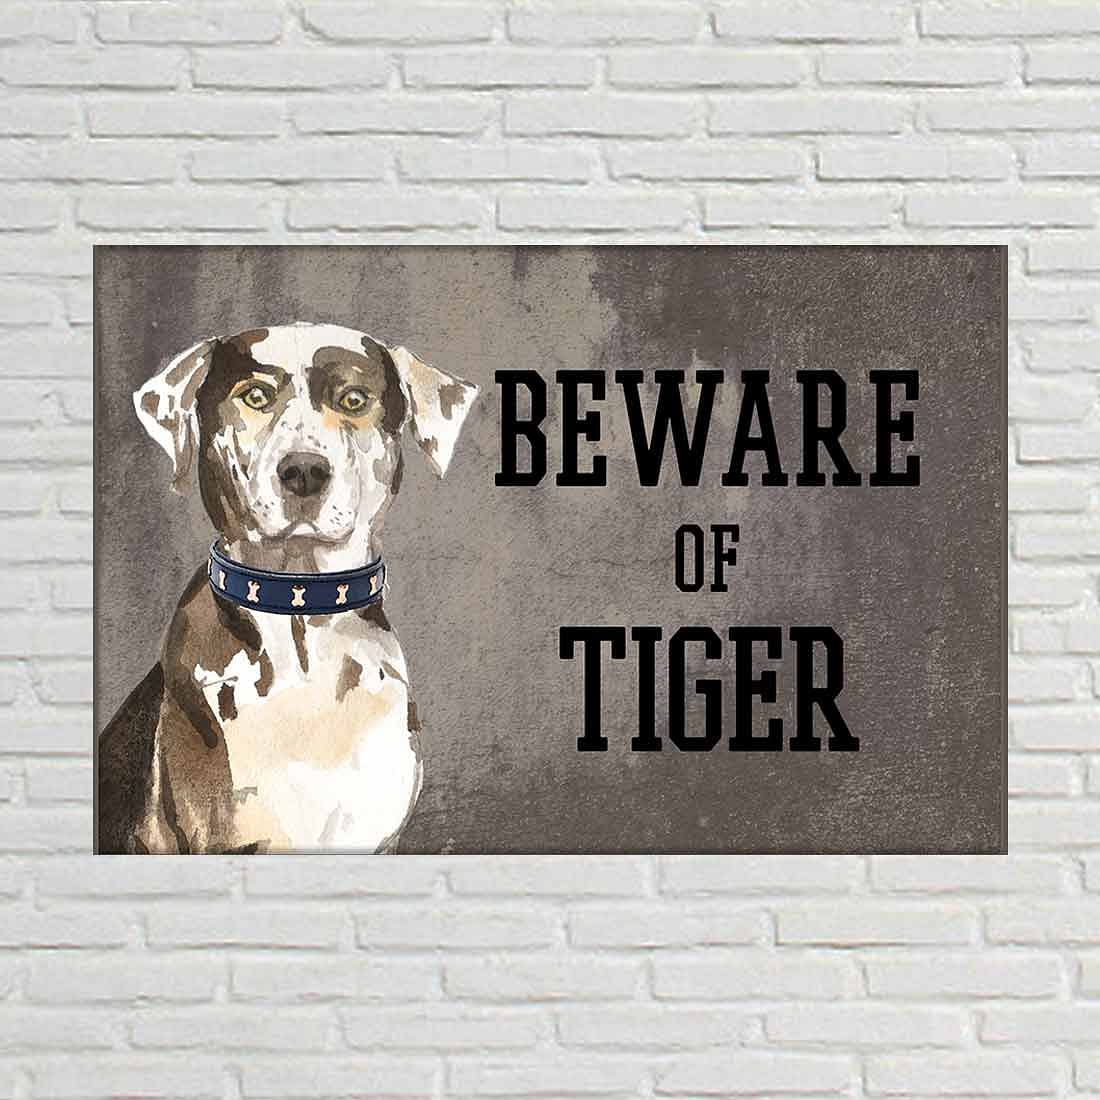 Personalized Dog Name Plates Beware Of Dog Sign - Catahoula Leopard Nutcase